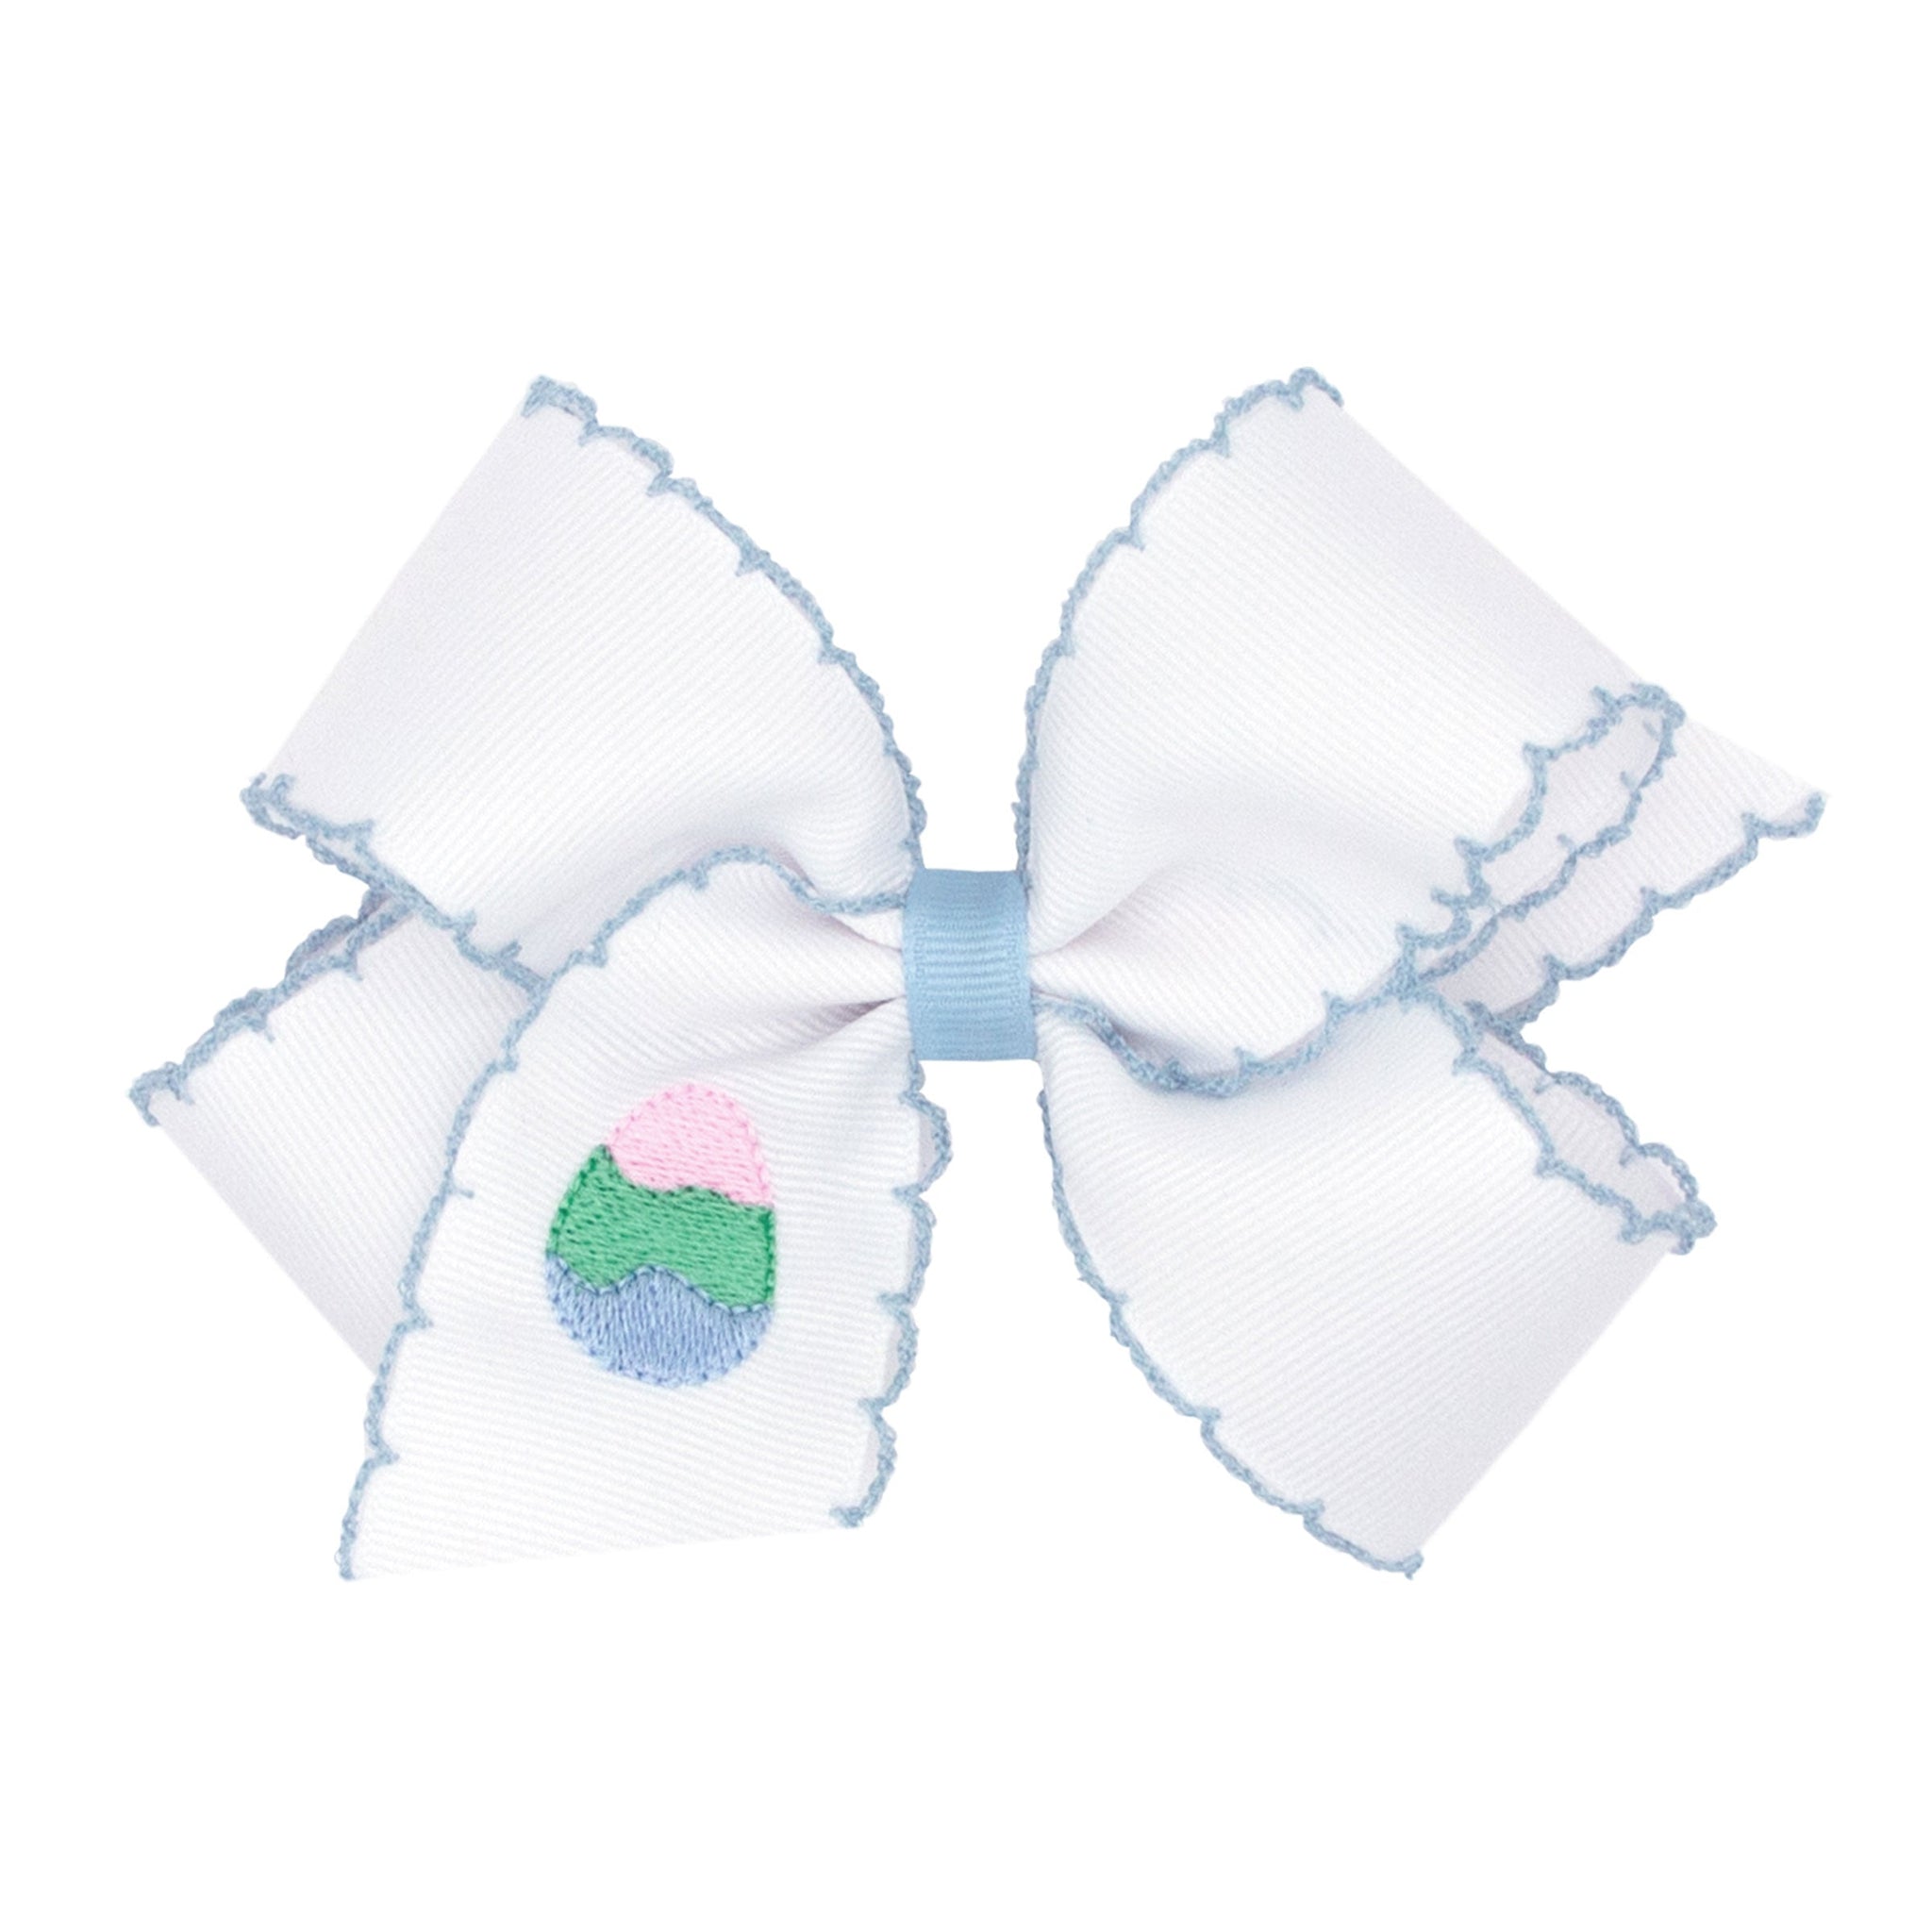 Medium Moonstitch on White Grosgrain Bow with Easter- Inspired Embroidered